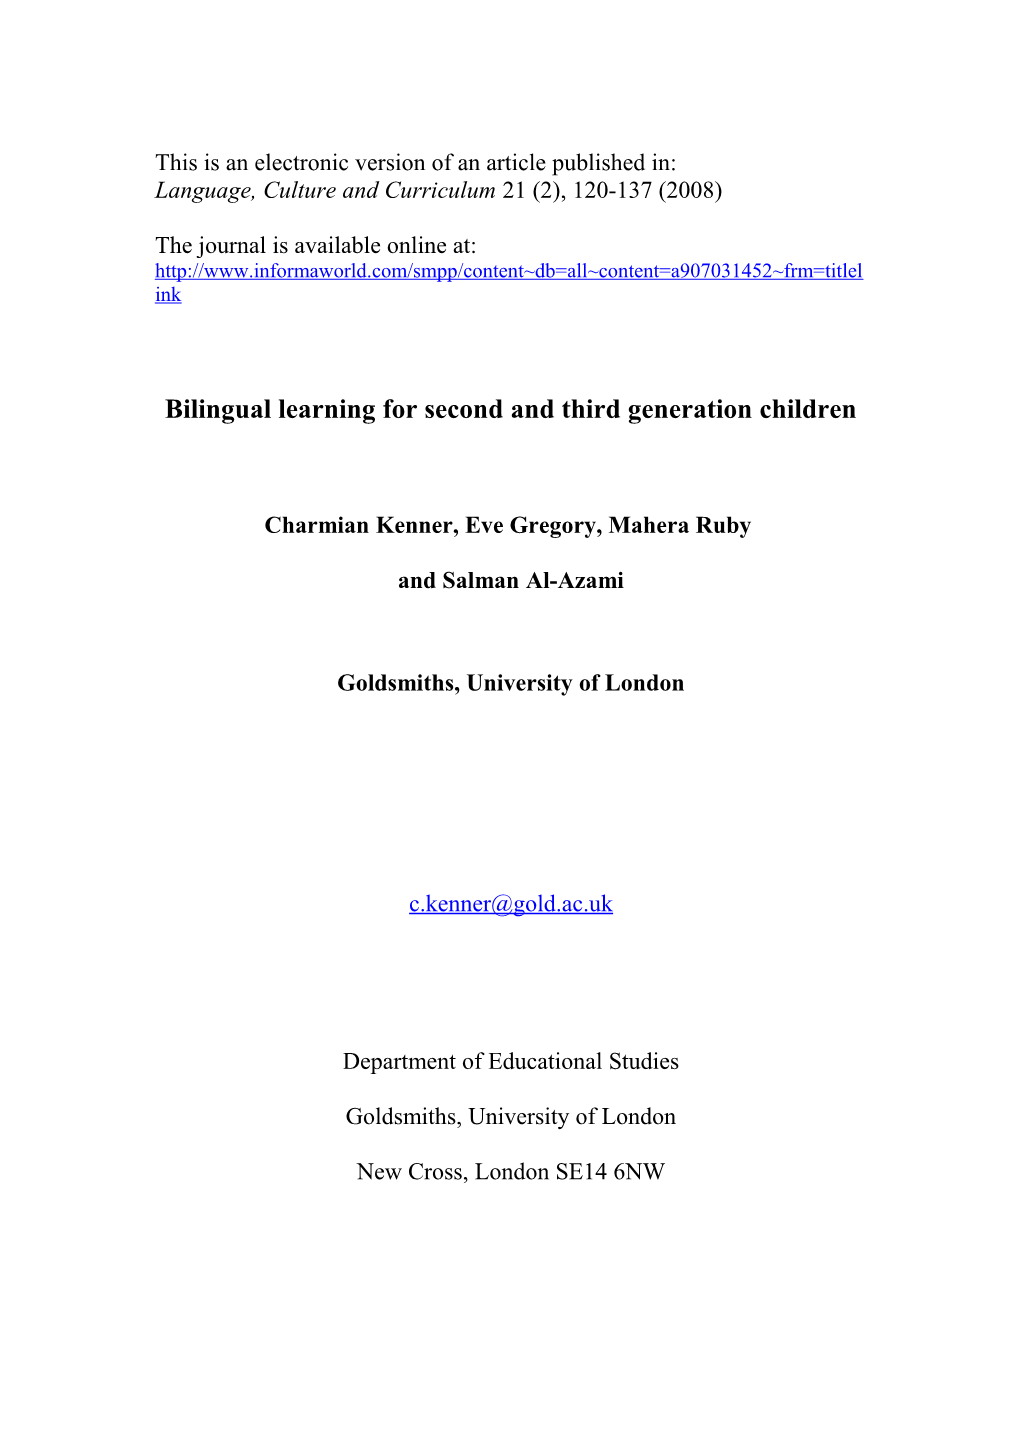 Bilingual Learning for Second and Third Generation Children